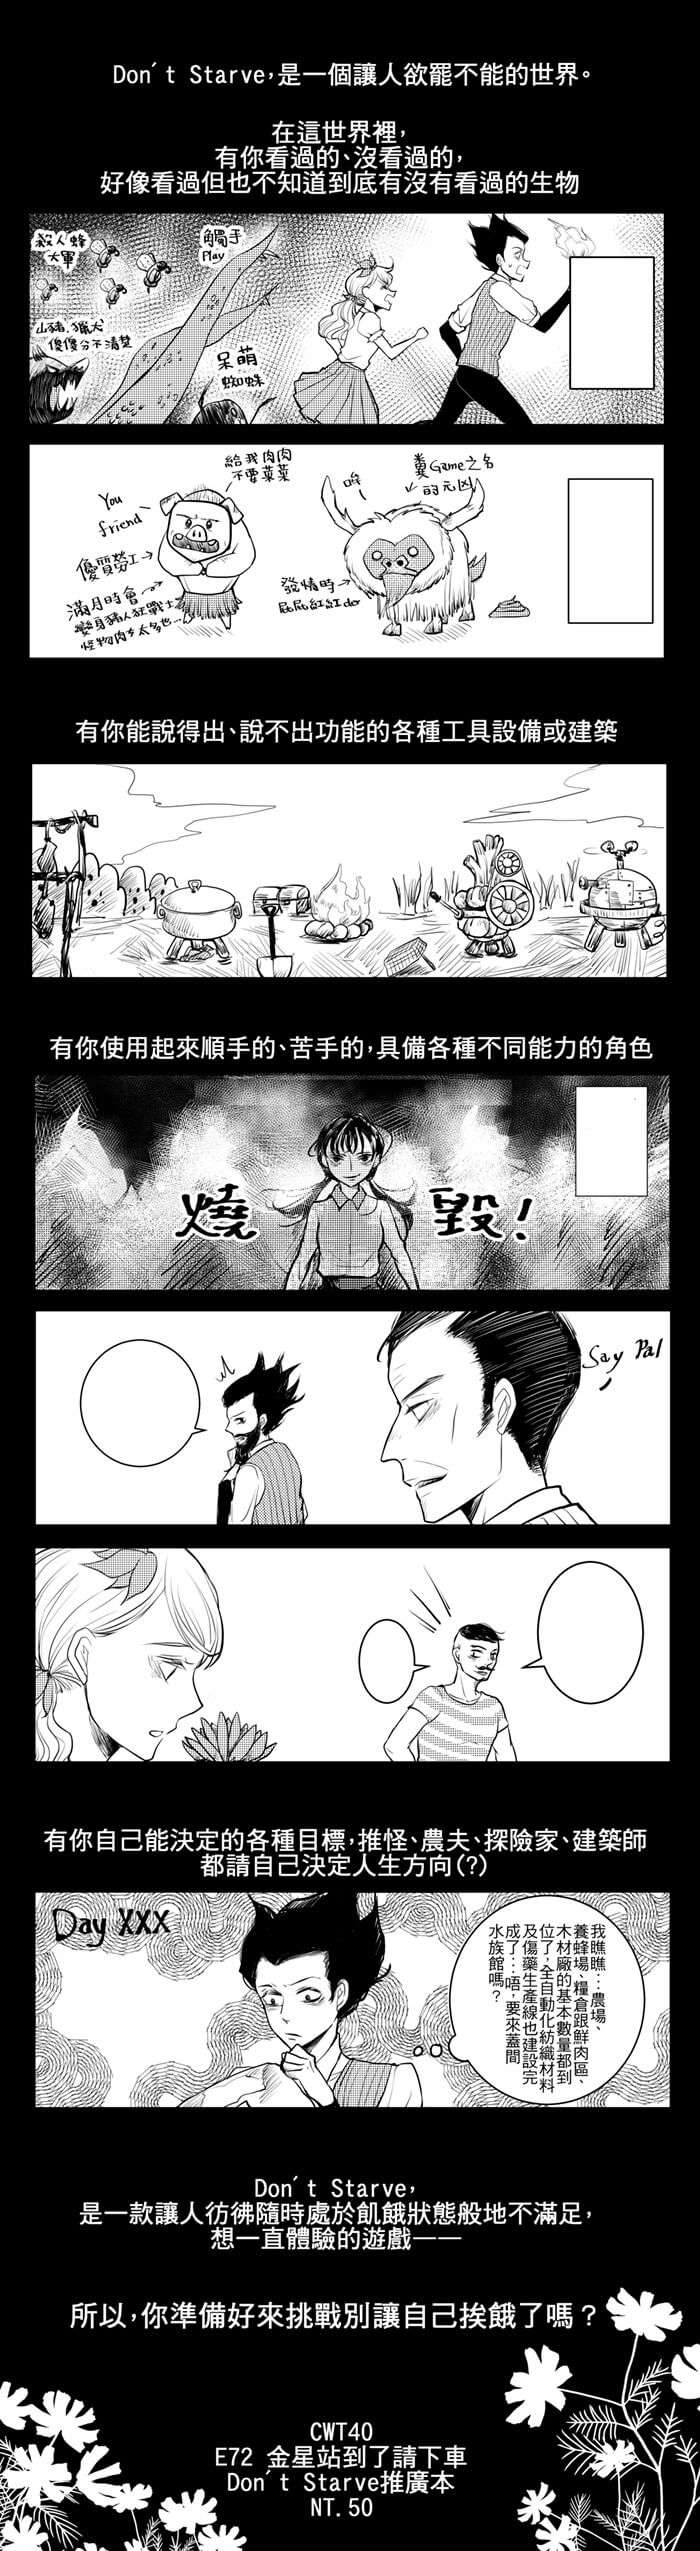 【Don't starve】Say pal,you don't look so good 試閱圖